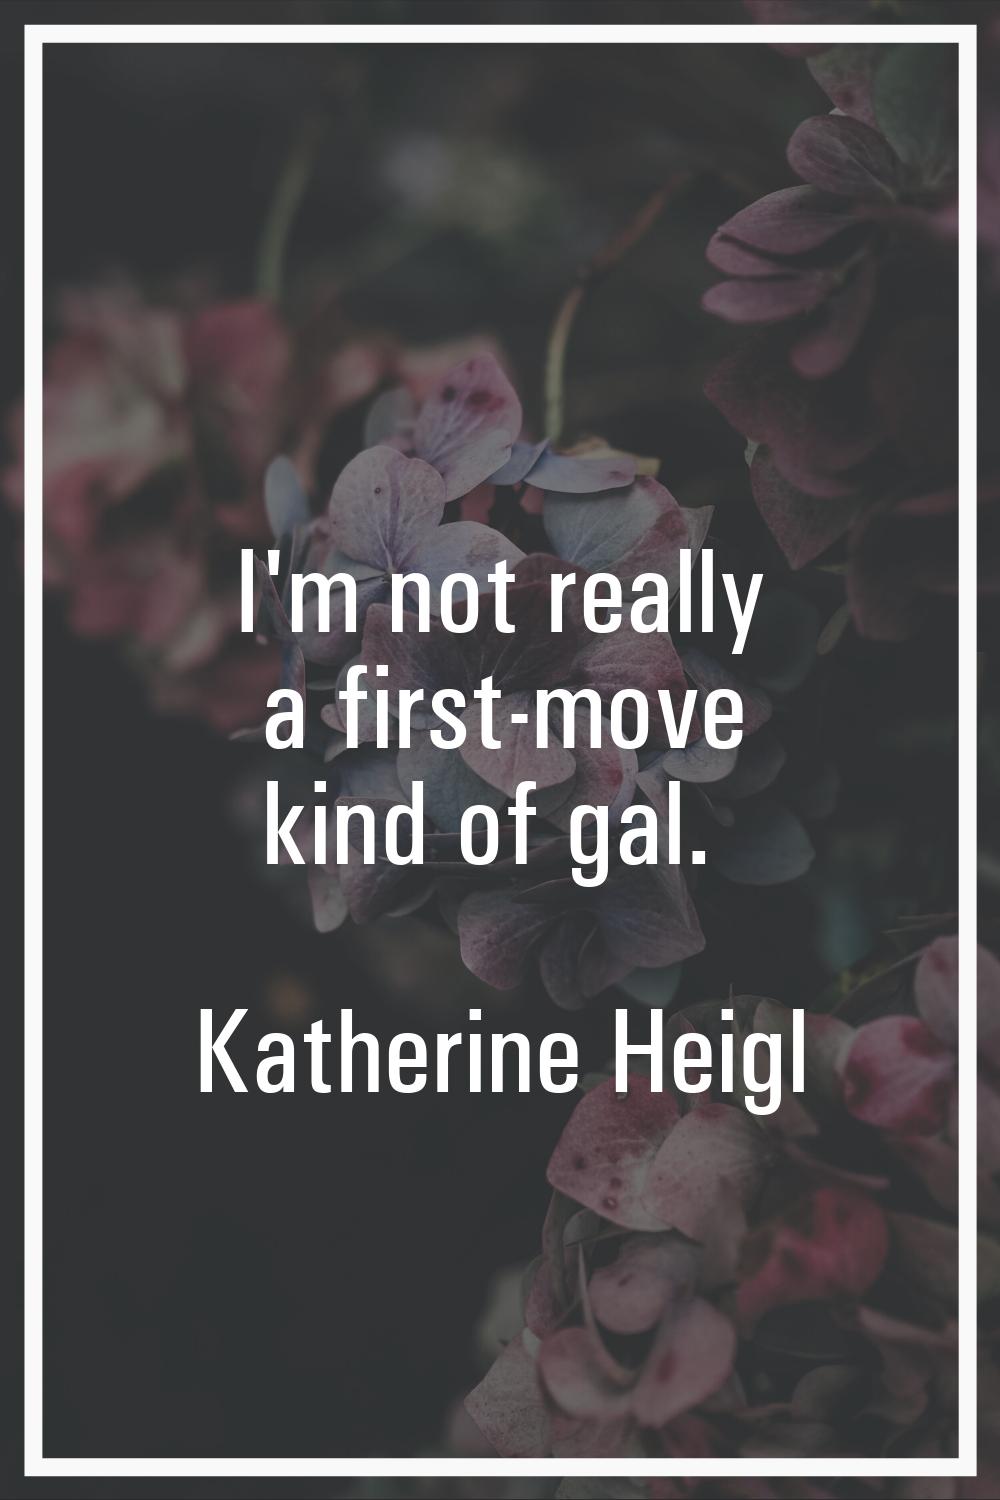 I'm not really a first-move kind of gal.